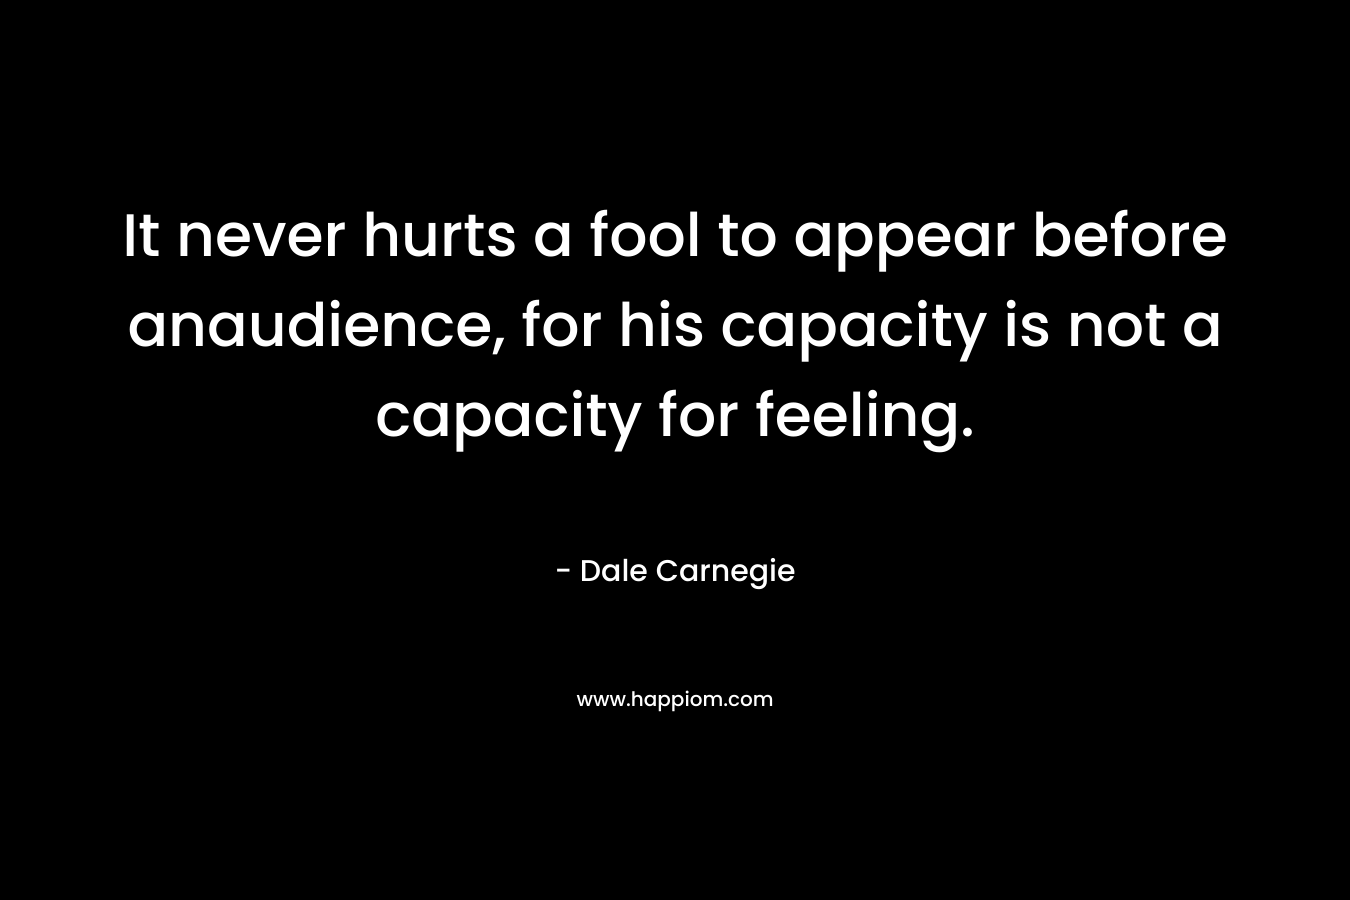 It never hurts a fool to appear before anaudience, for his capacity is not a capacity for feeling.